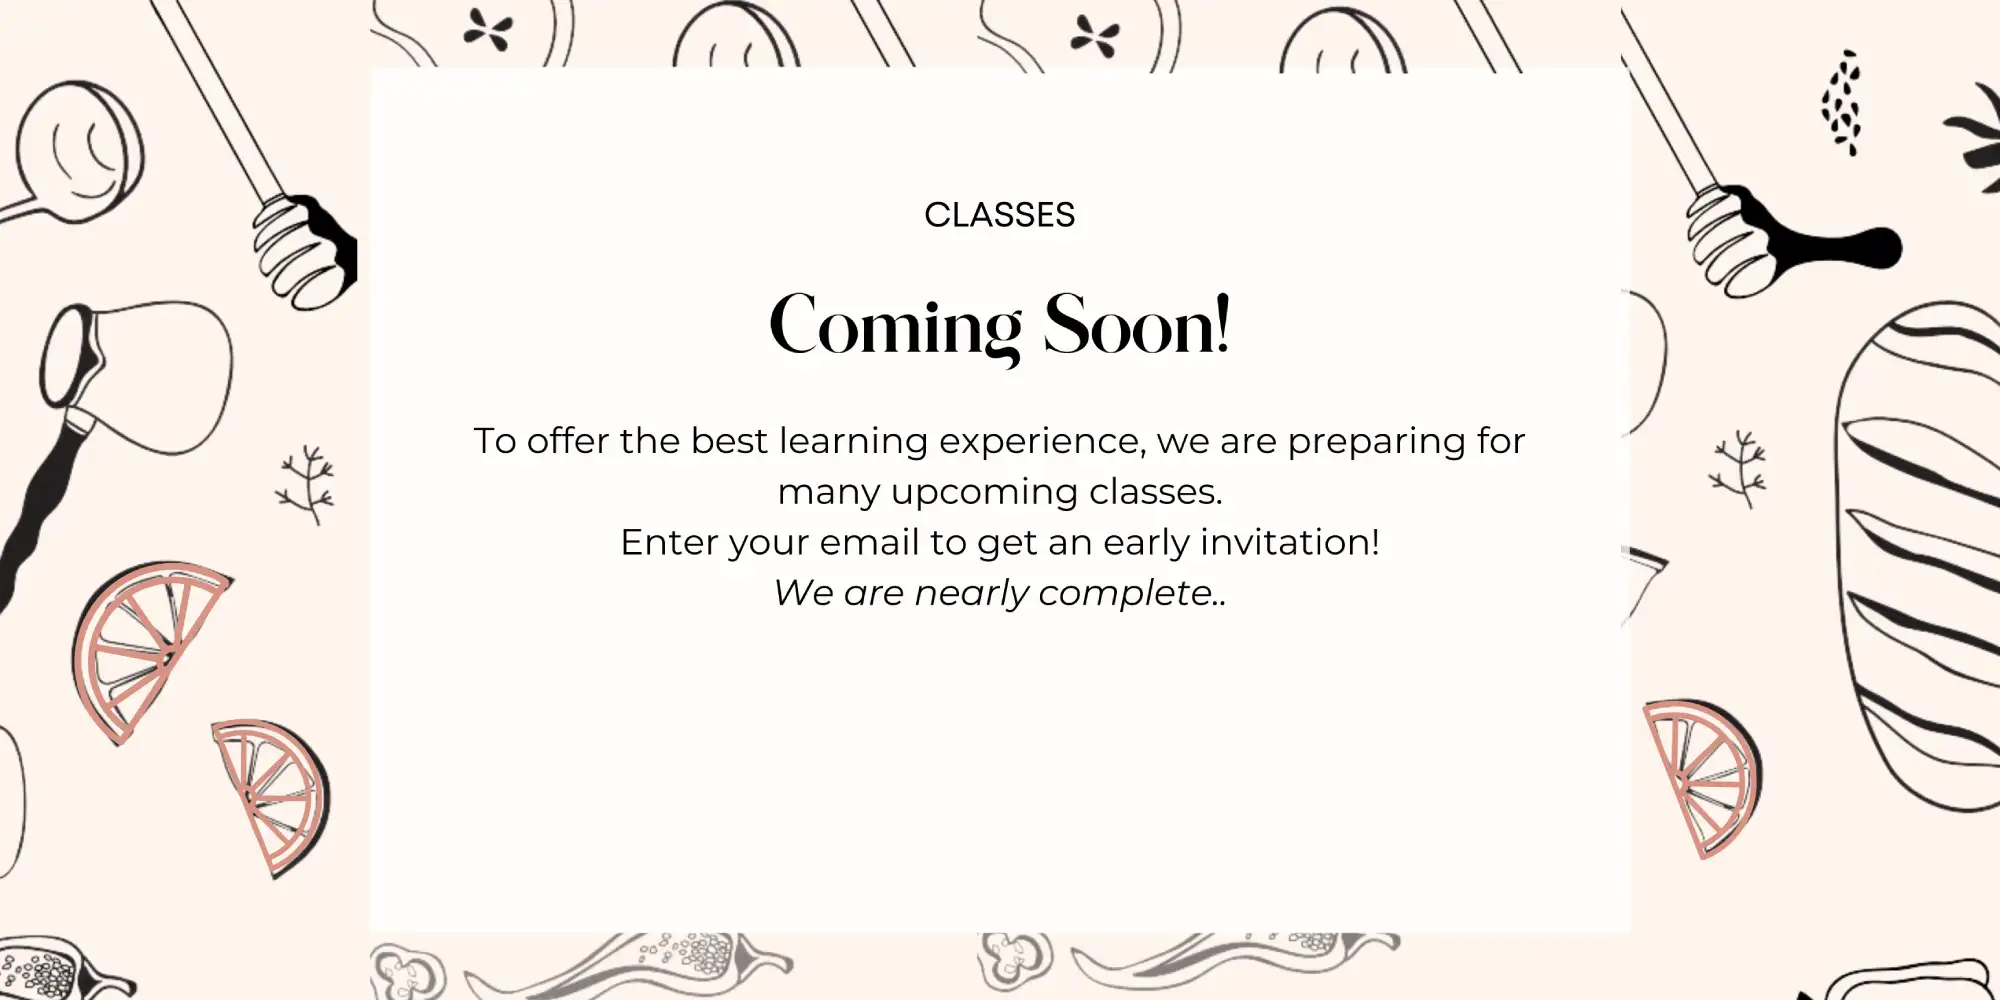 coming soon classes